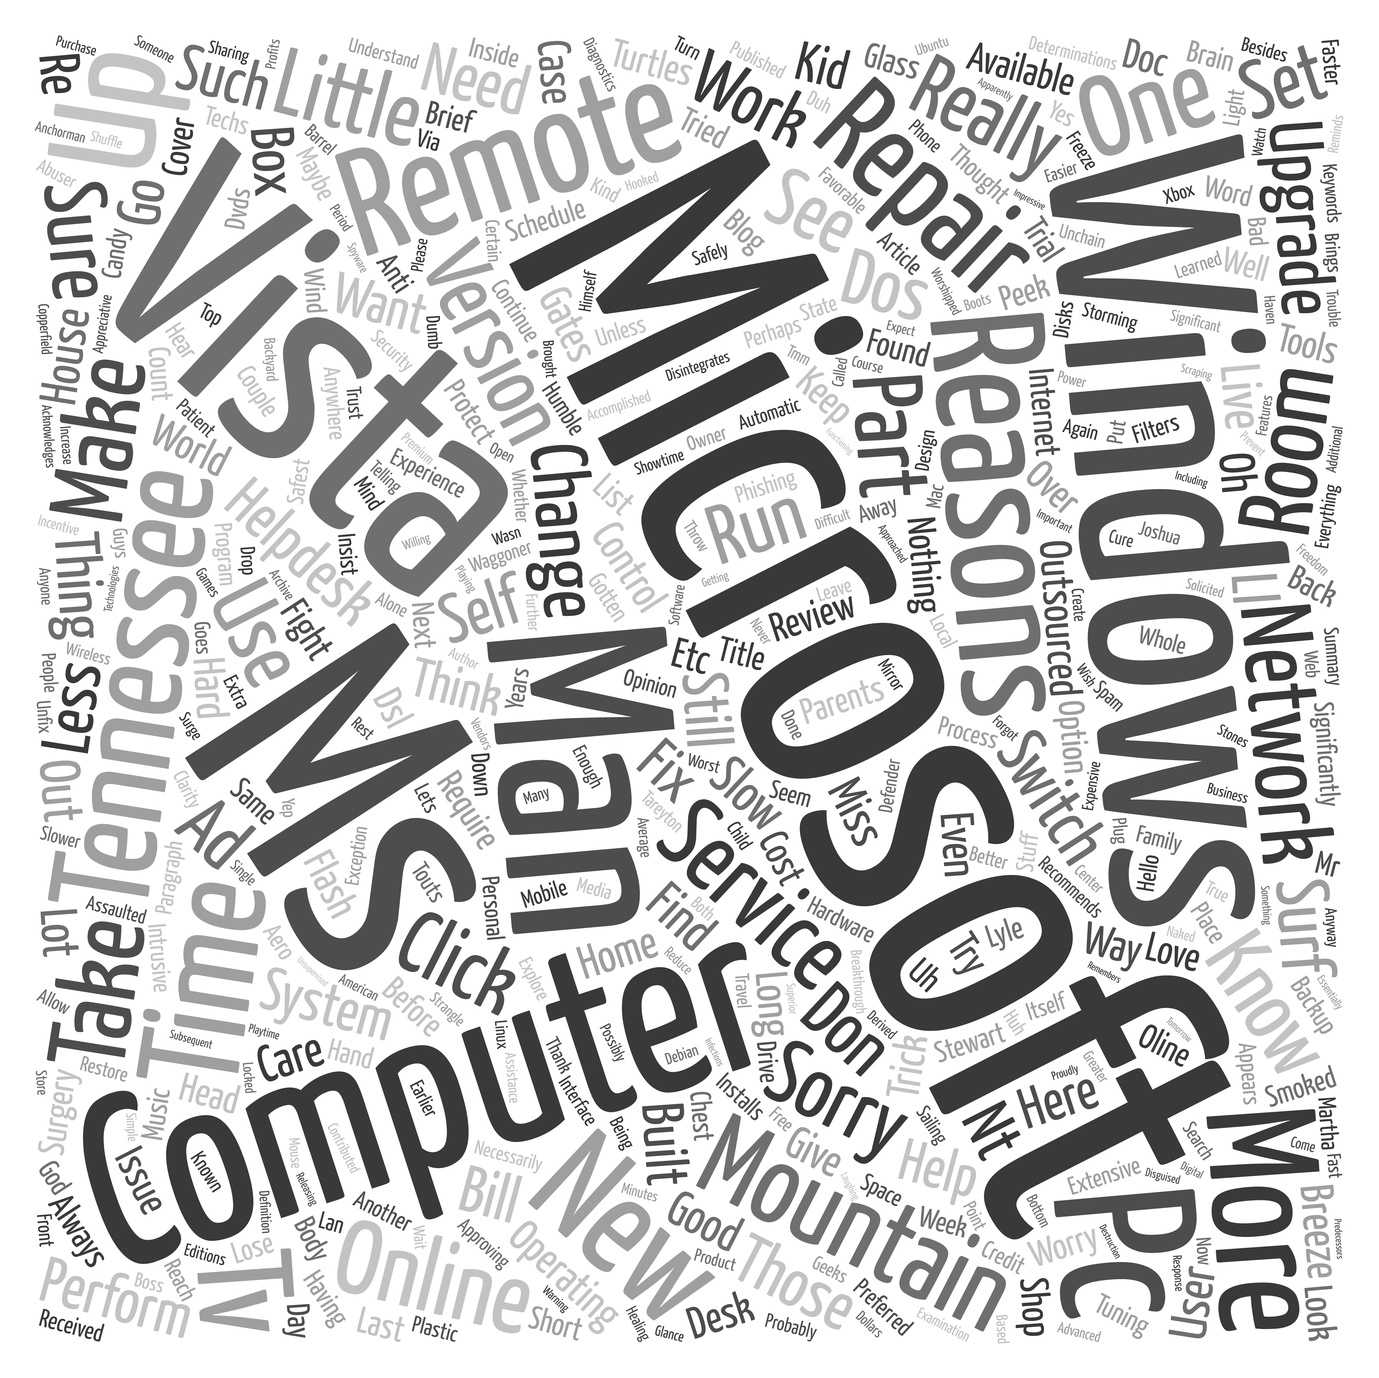 Why Change To Windows Vista Part 1 of 4 text background wordcloud concept